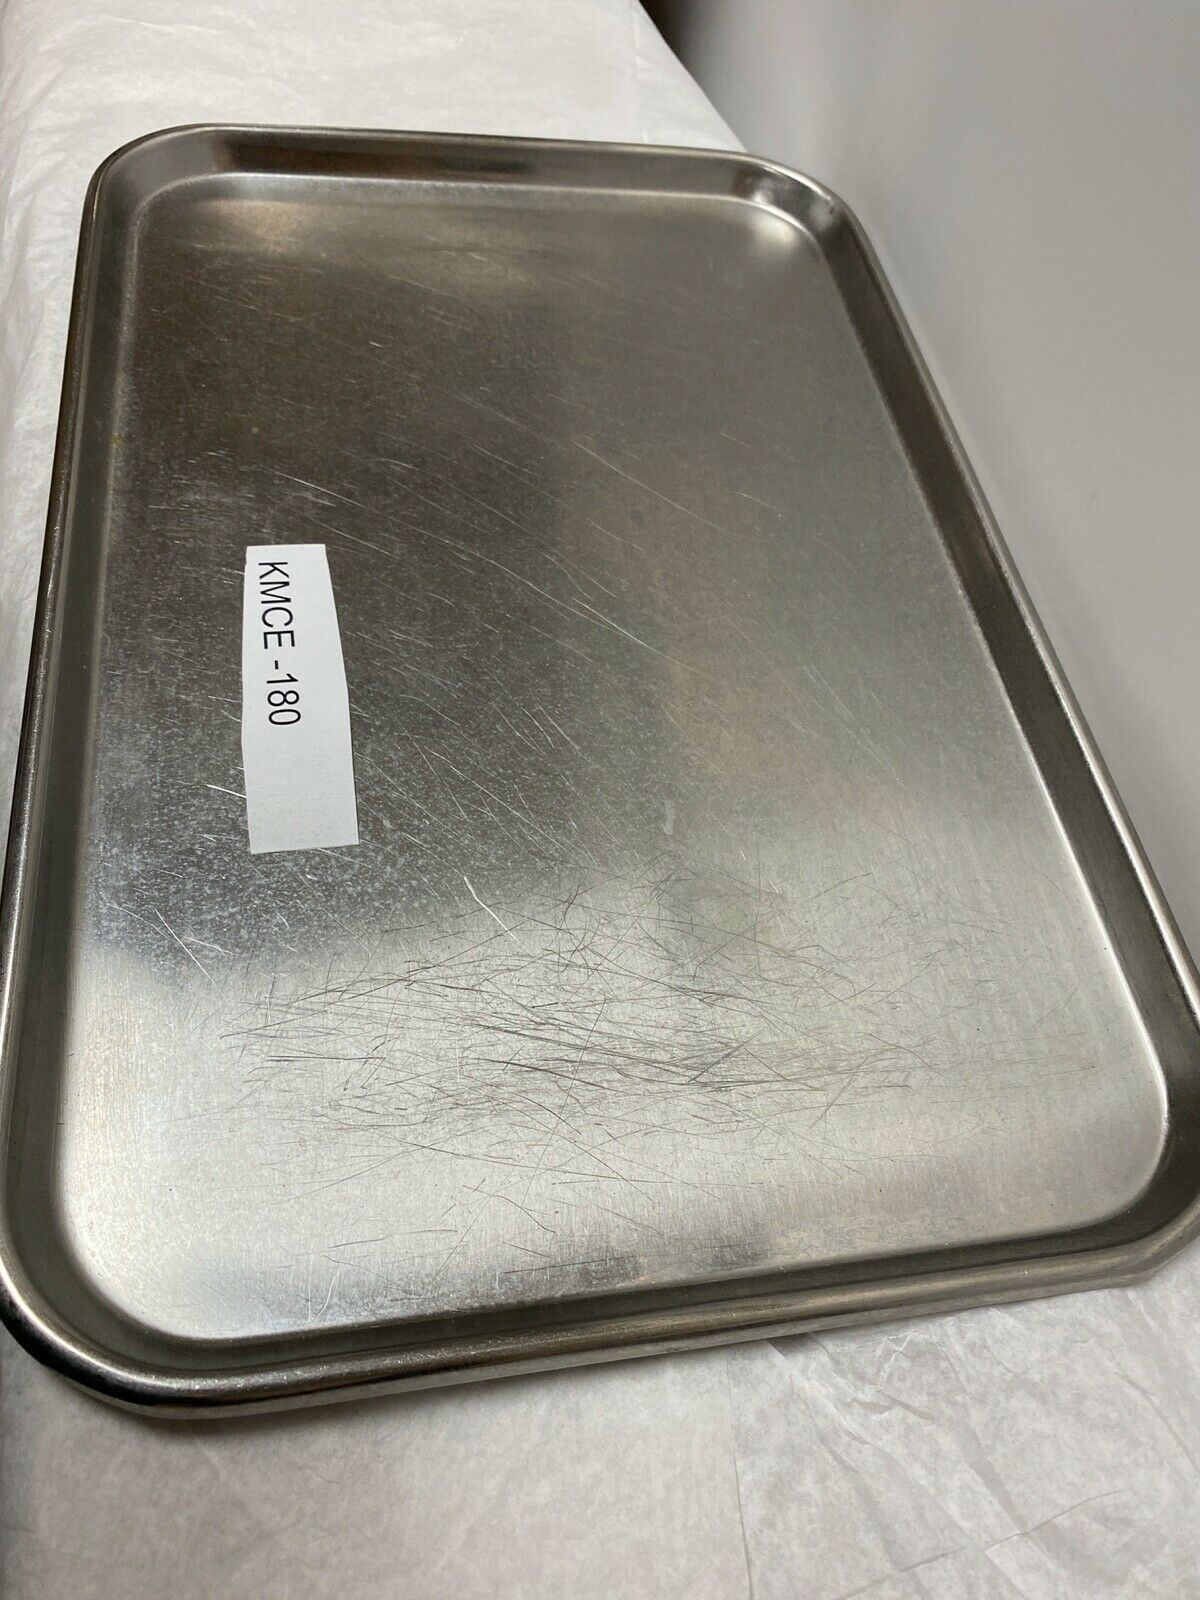 Vollrath Stainless Steel Surgical 18" x 12" Tray 8019 | KMCE-180 DIAGNOSTIC ULTRASOUND MACHINES FOR SALE